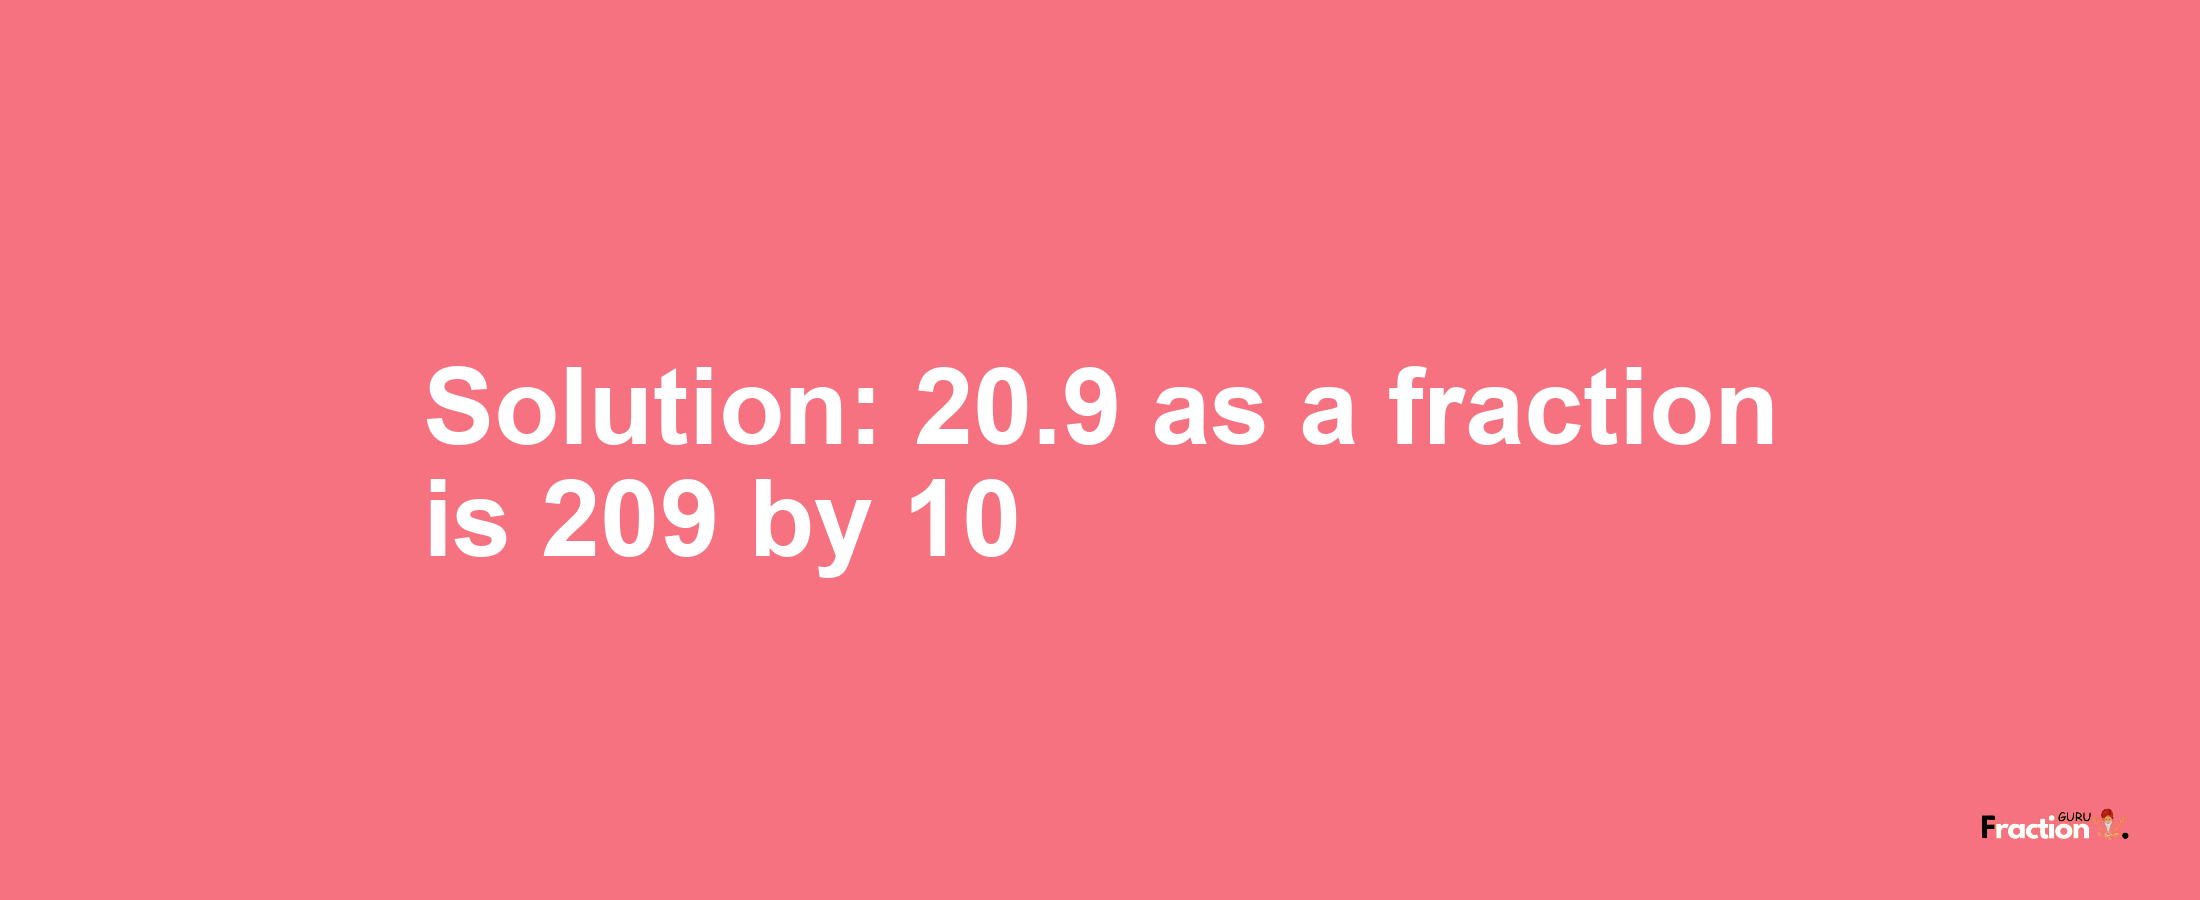 Solution:20.9 as a fraction is 209/10